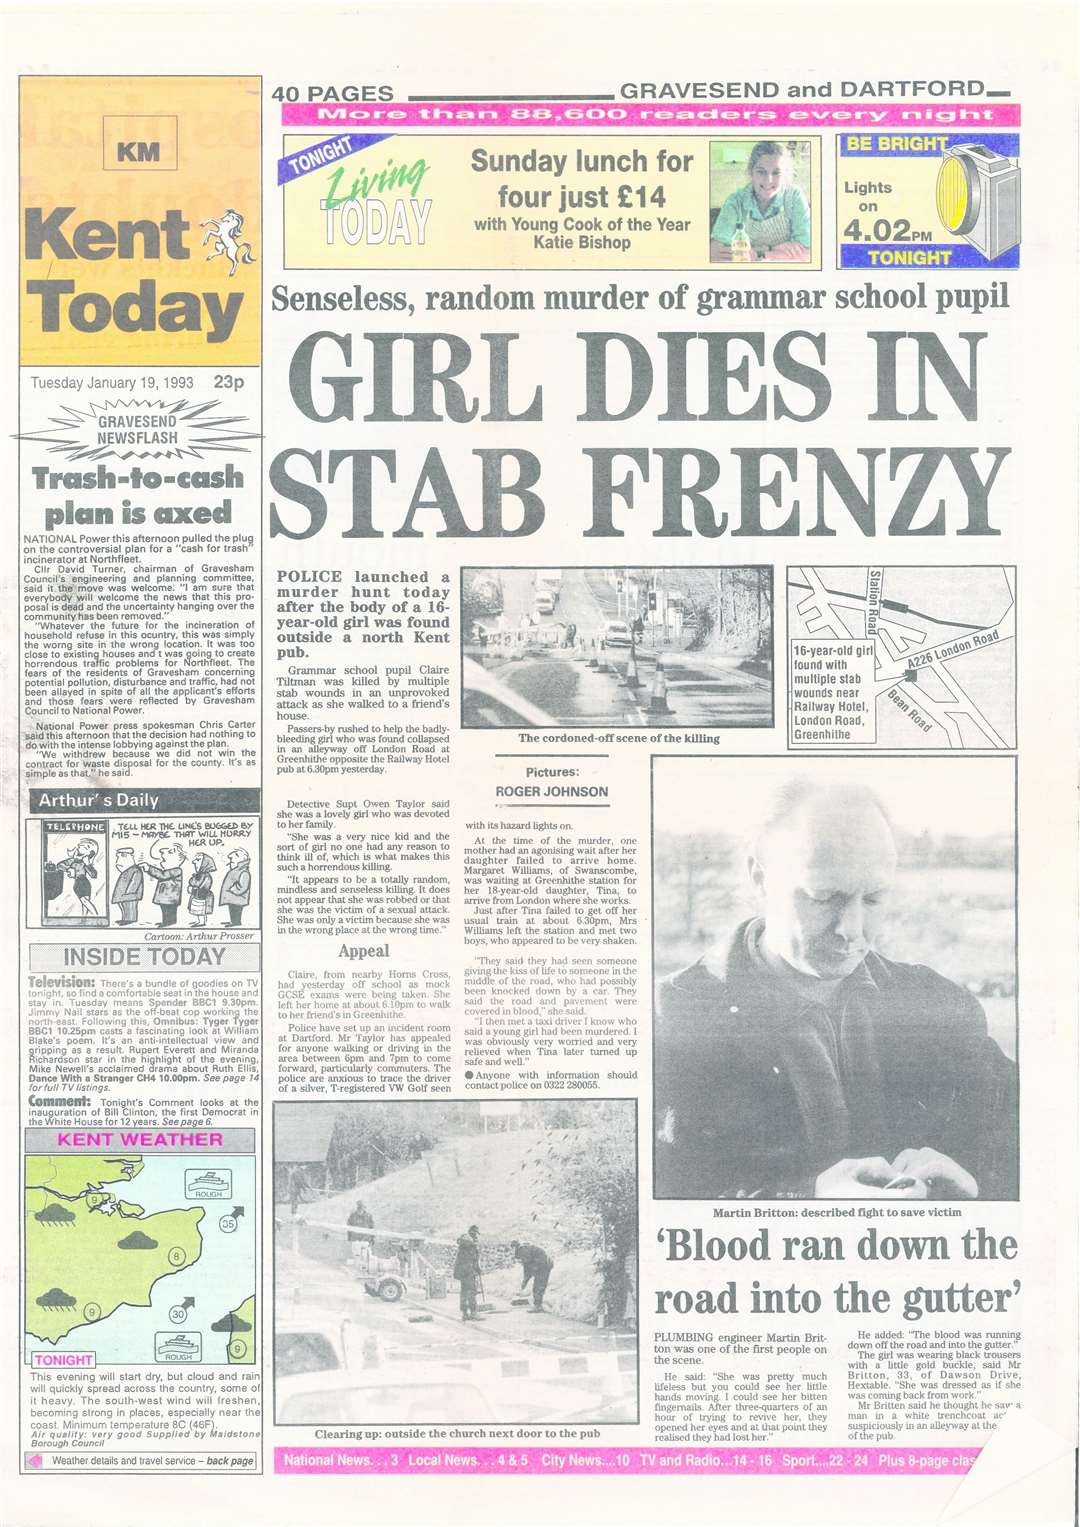 Kent Today's front page on January 19, 1993